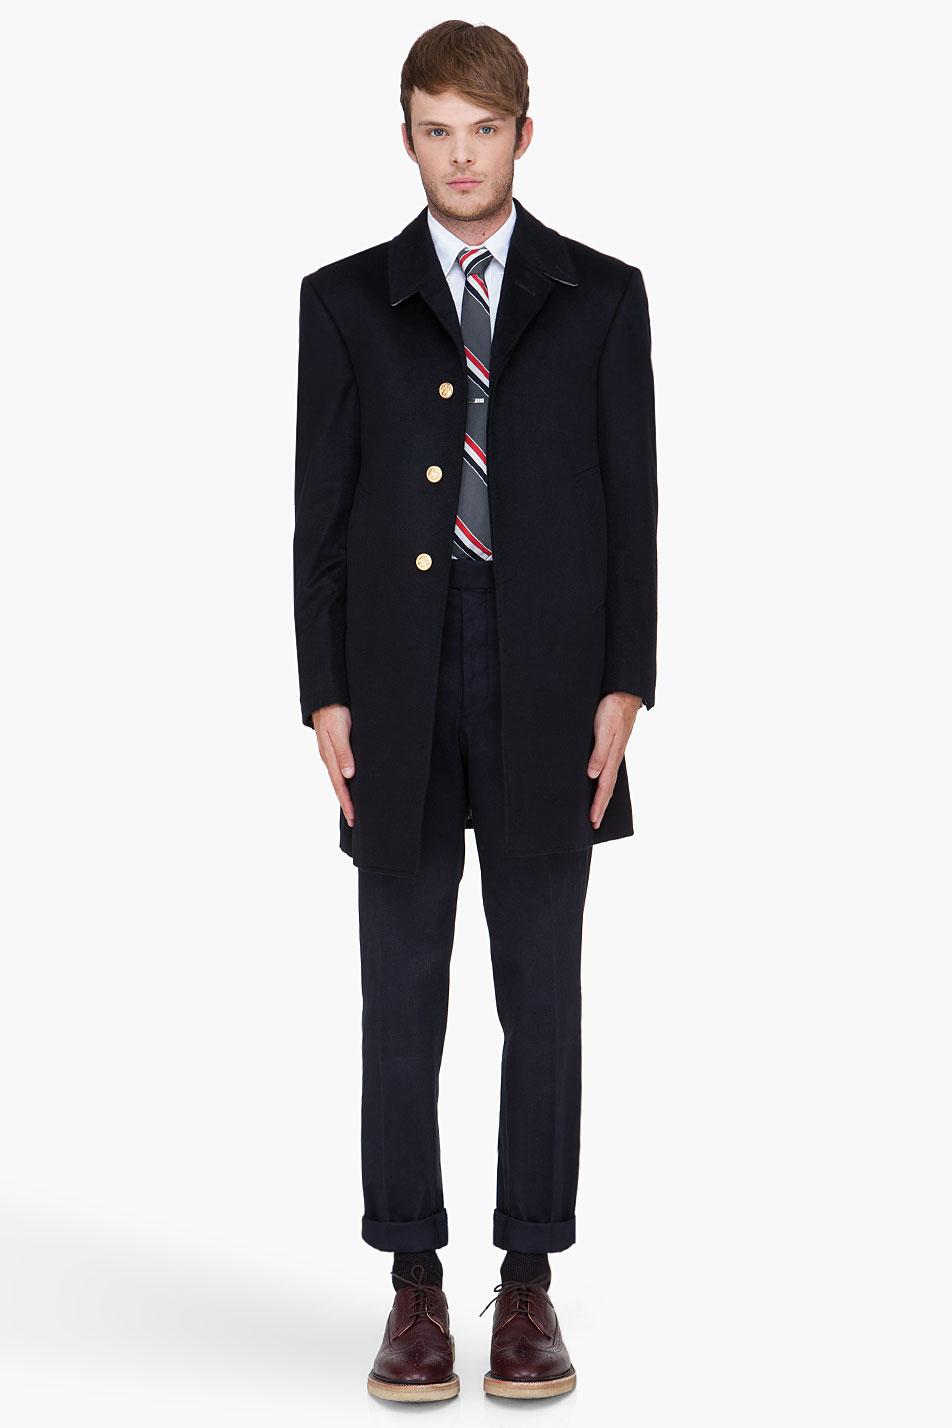 Lyst - Thom Browne Navy Cashmere Bal Collar Coat in Black for Men